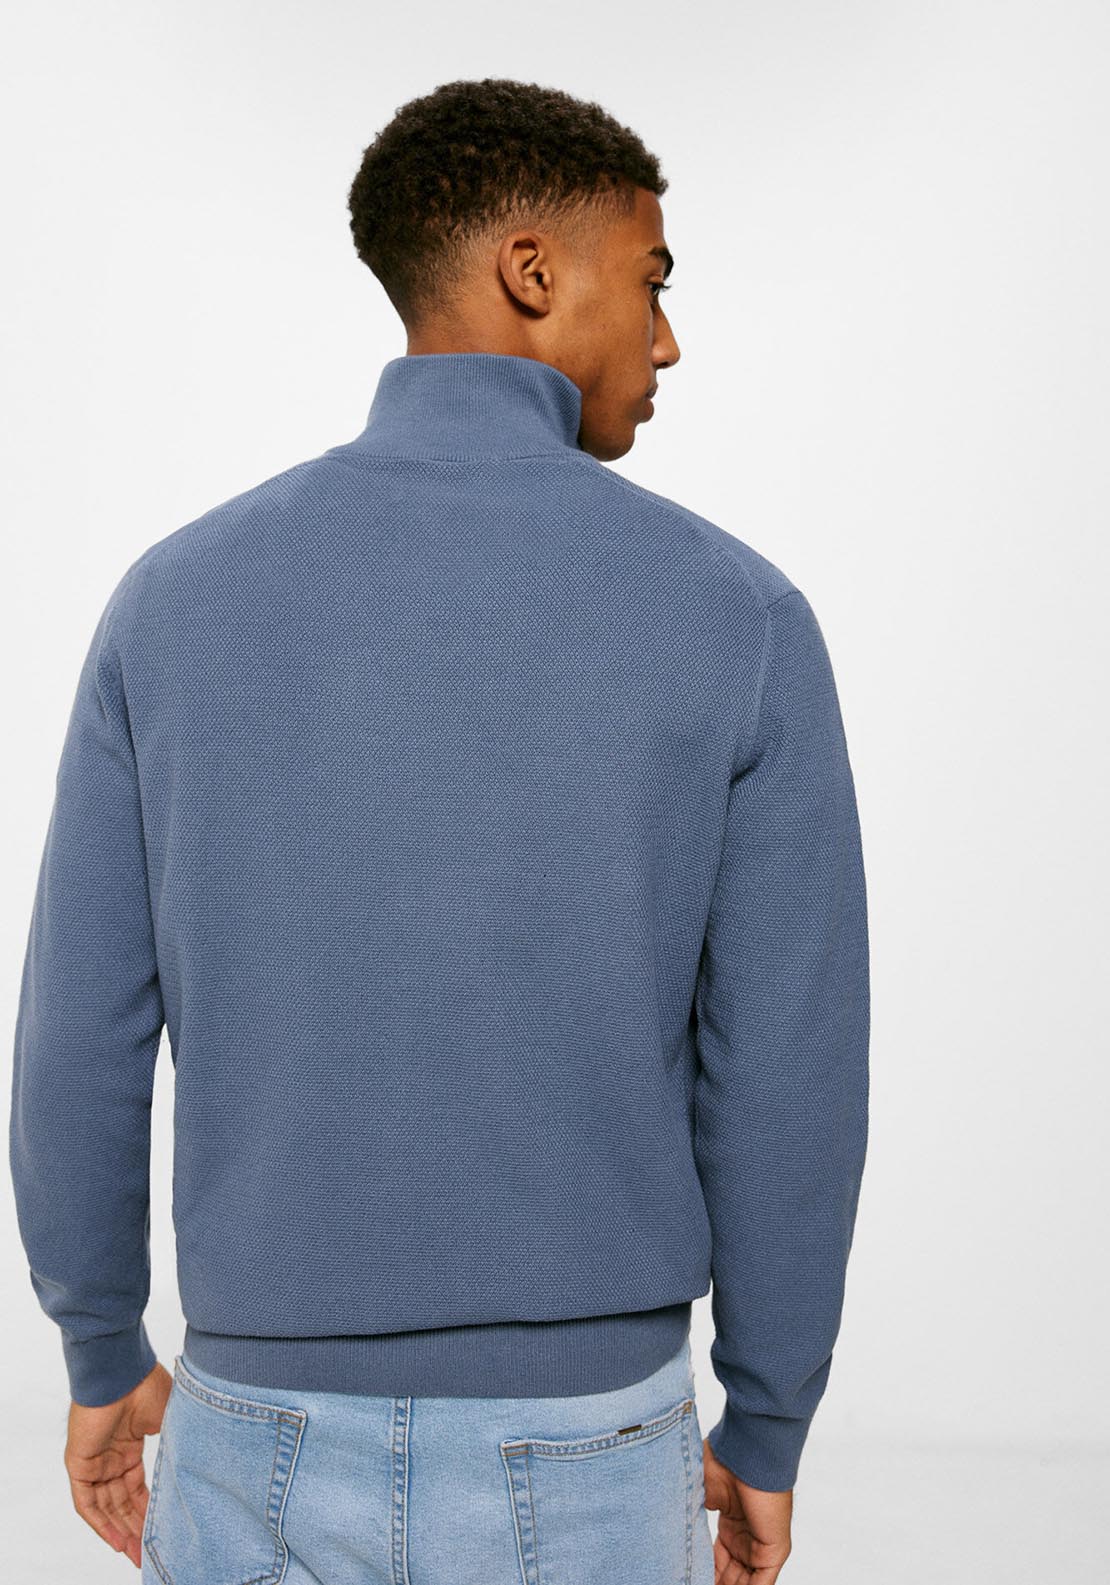 Springfield Structured jumper with zipped collar - Blue 3 Shaws Department Stores